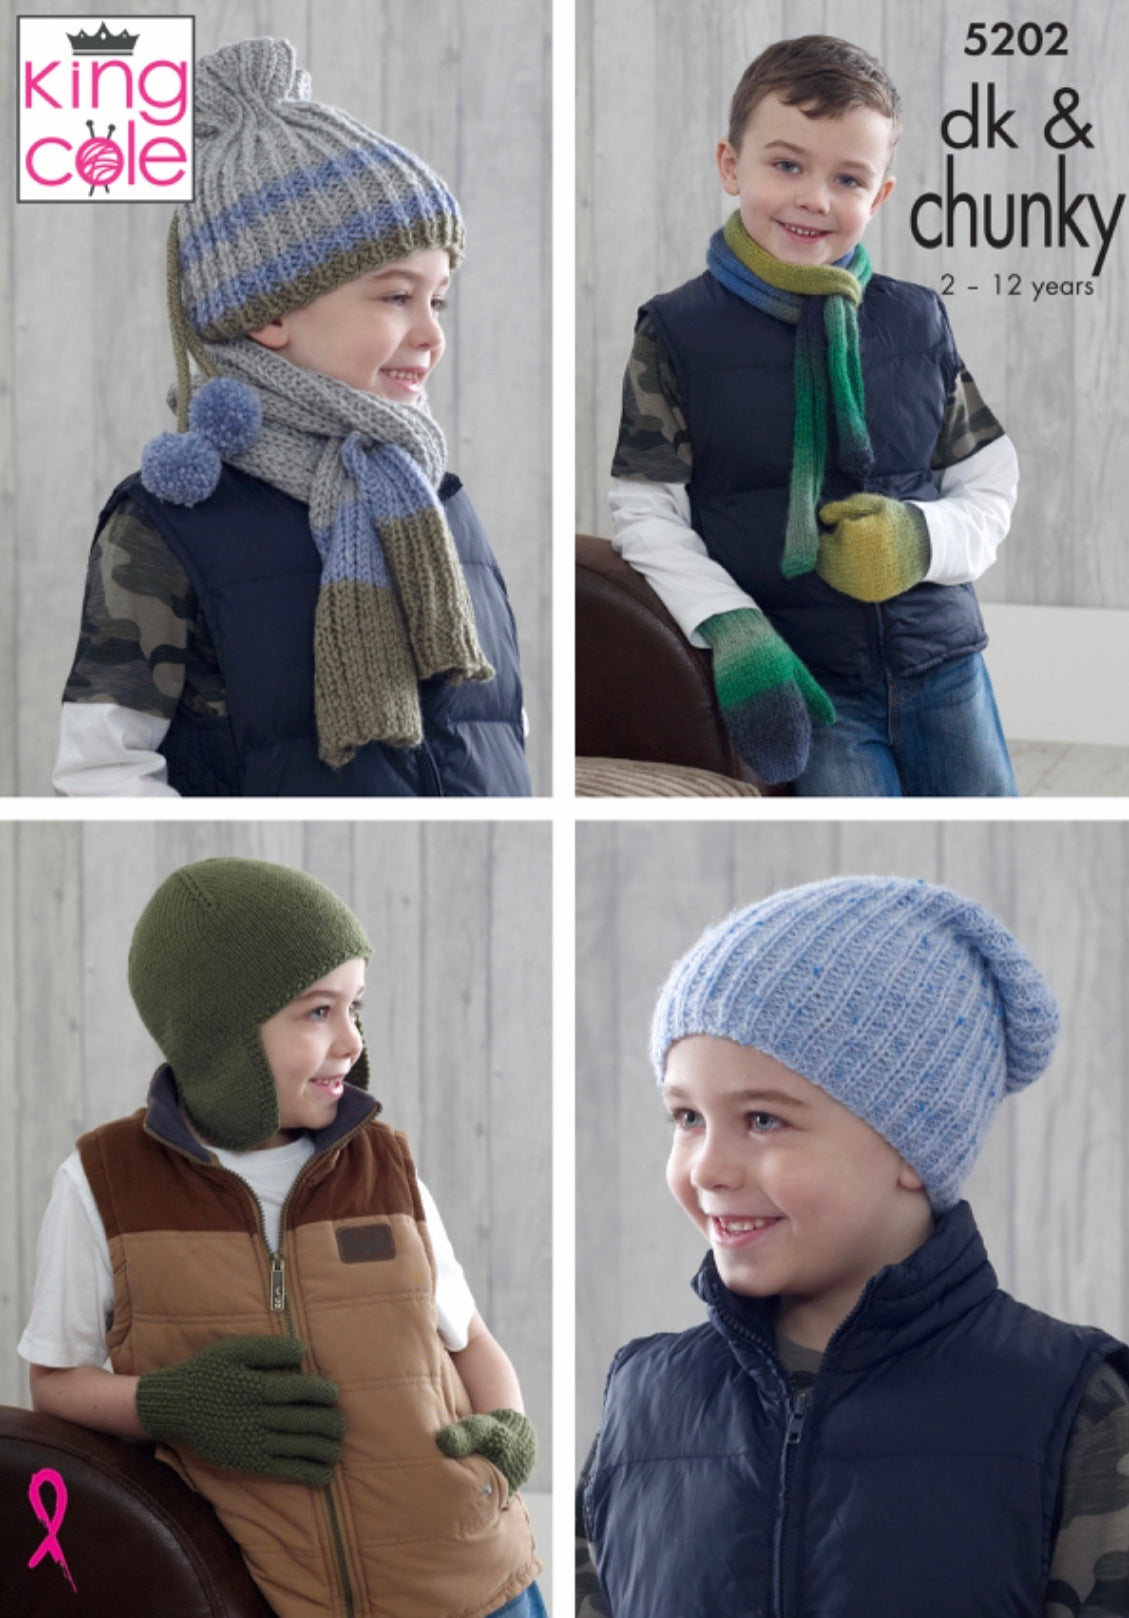 King Cole Pattern 5202 Boy's Hats, Scarves, Gloves & Mittens in DK & Chunky